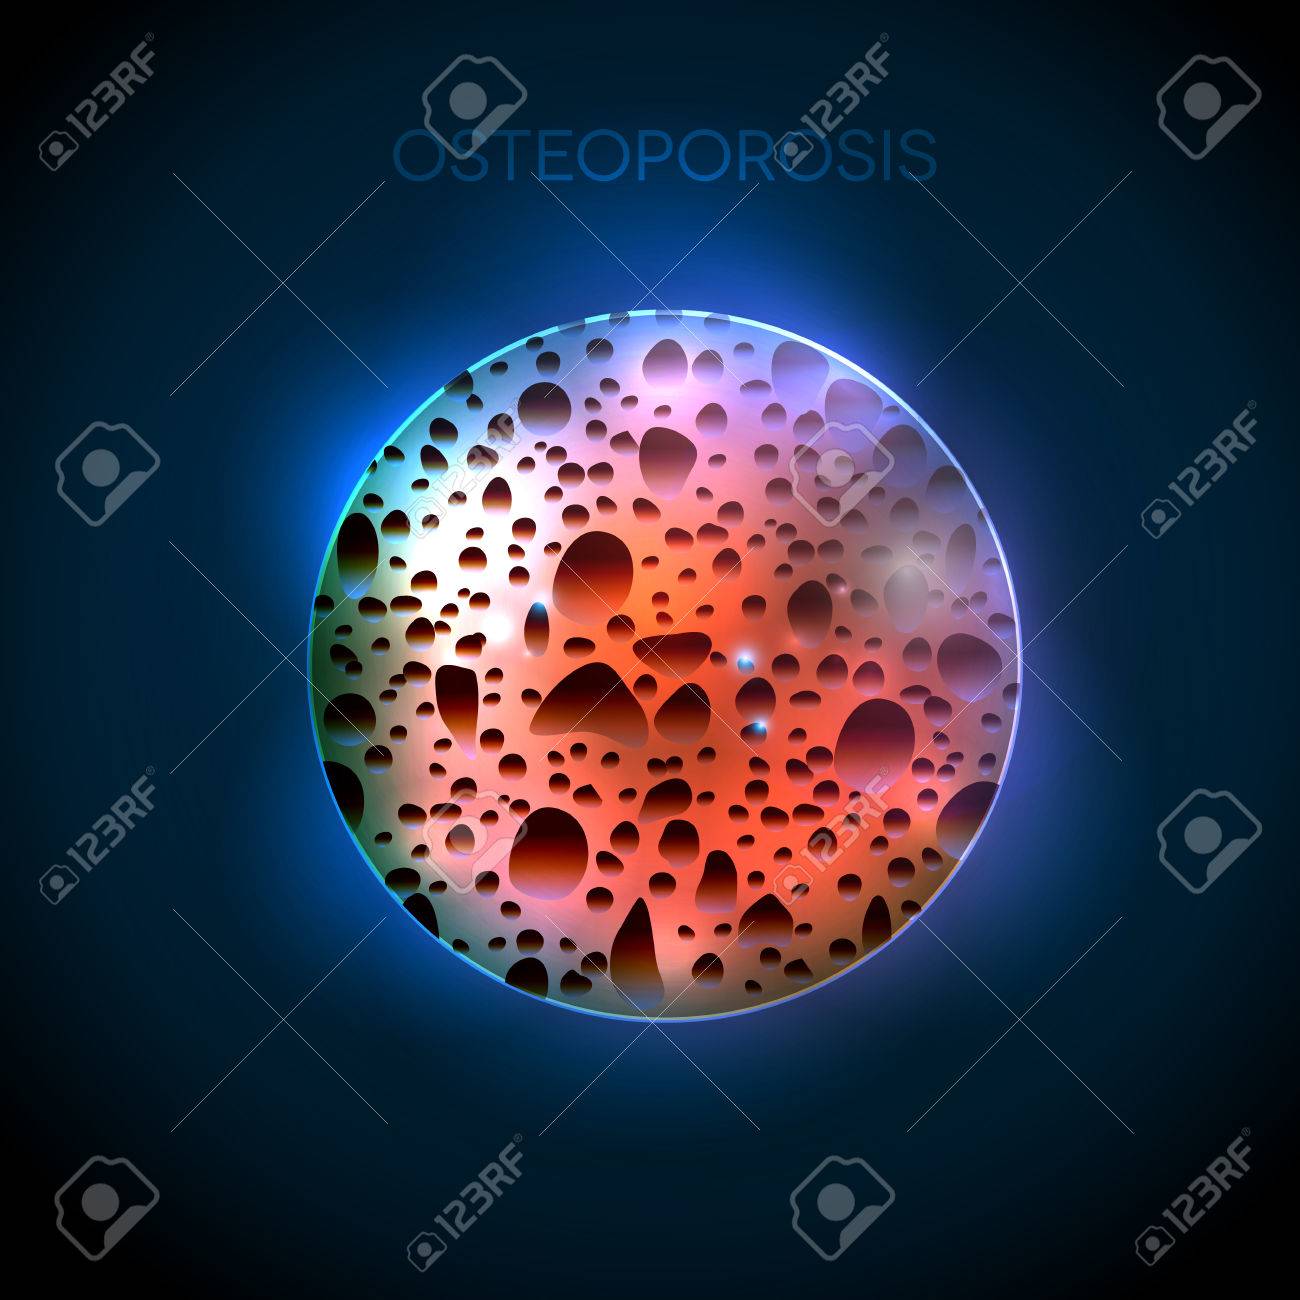 Osteoporosis Round Illustration On A Abstract Blue Background